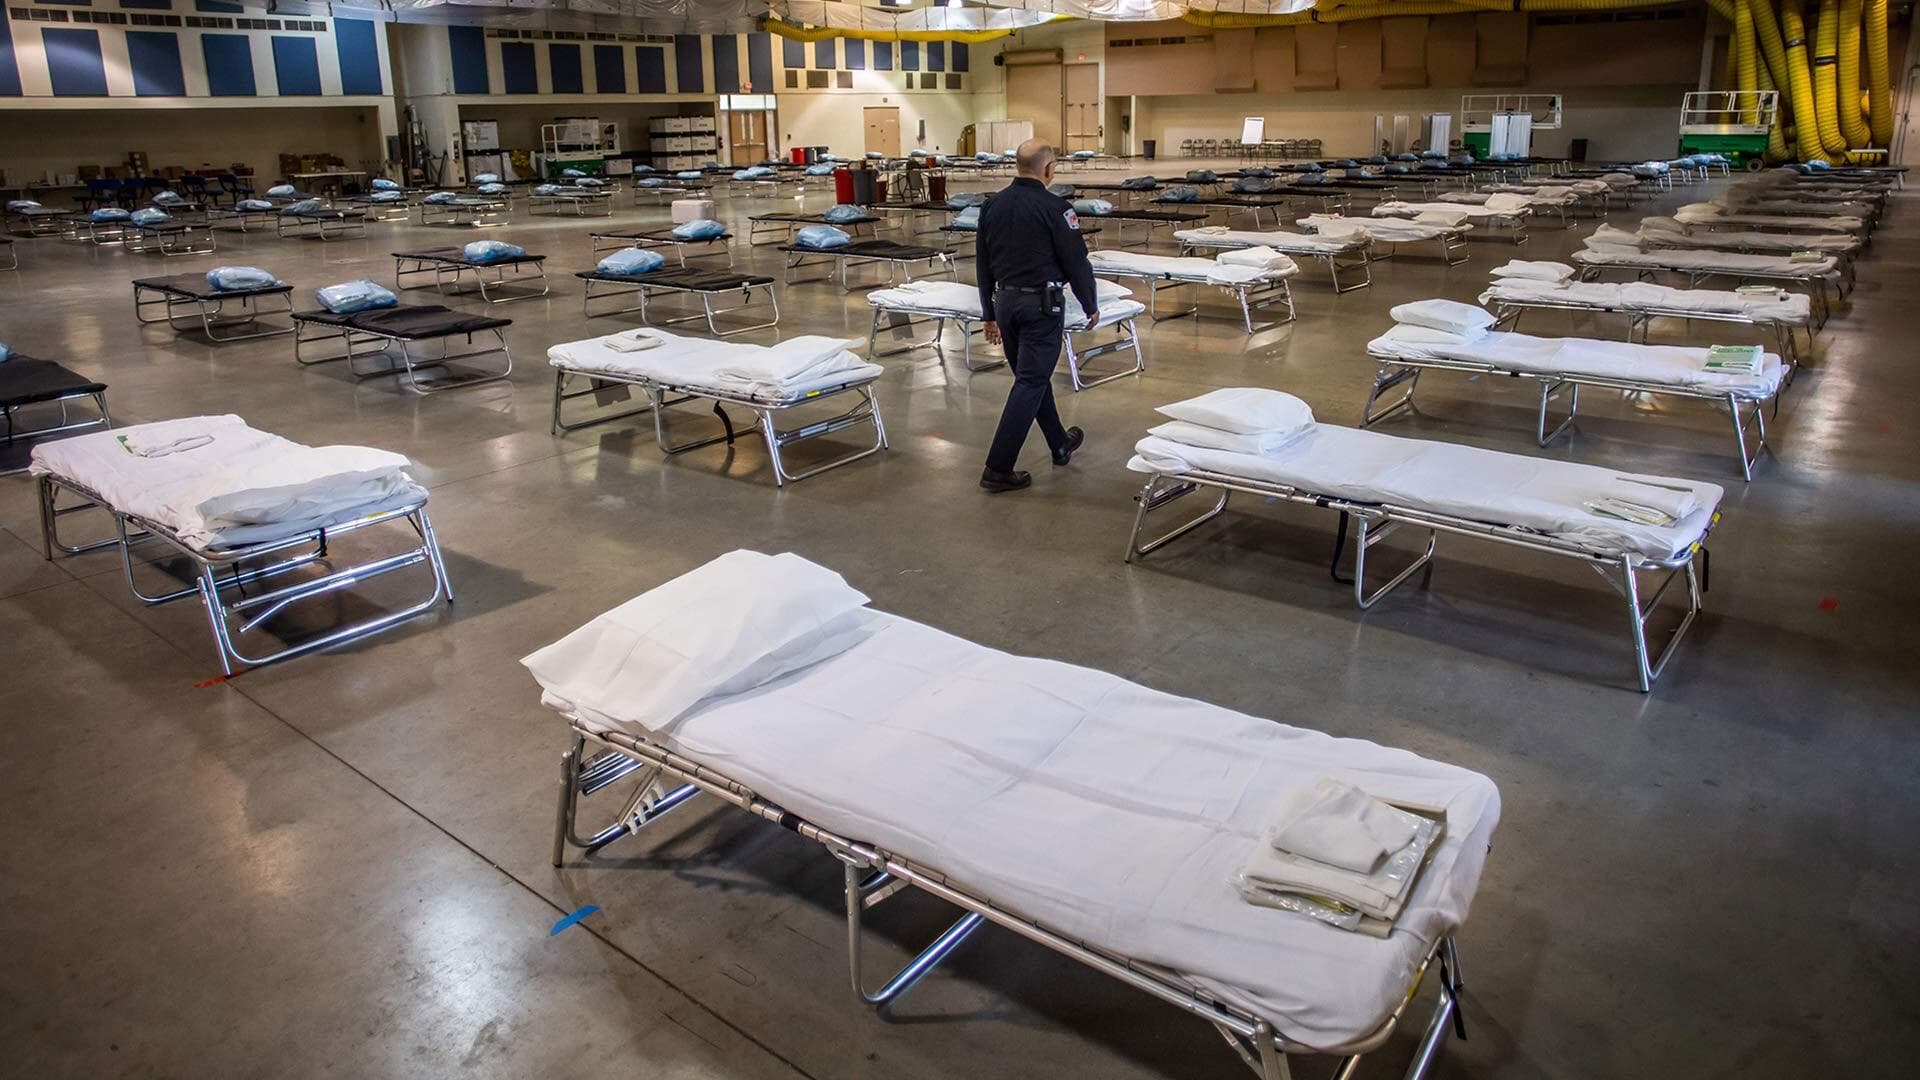 A  new field hospital set up in Indio, Calif., with 125 beds will help ease the burden on the local hospital system amid the growing COVID-19 crisis.